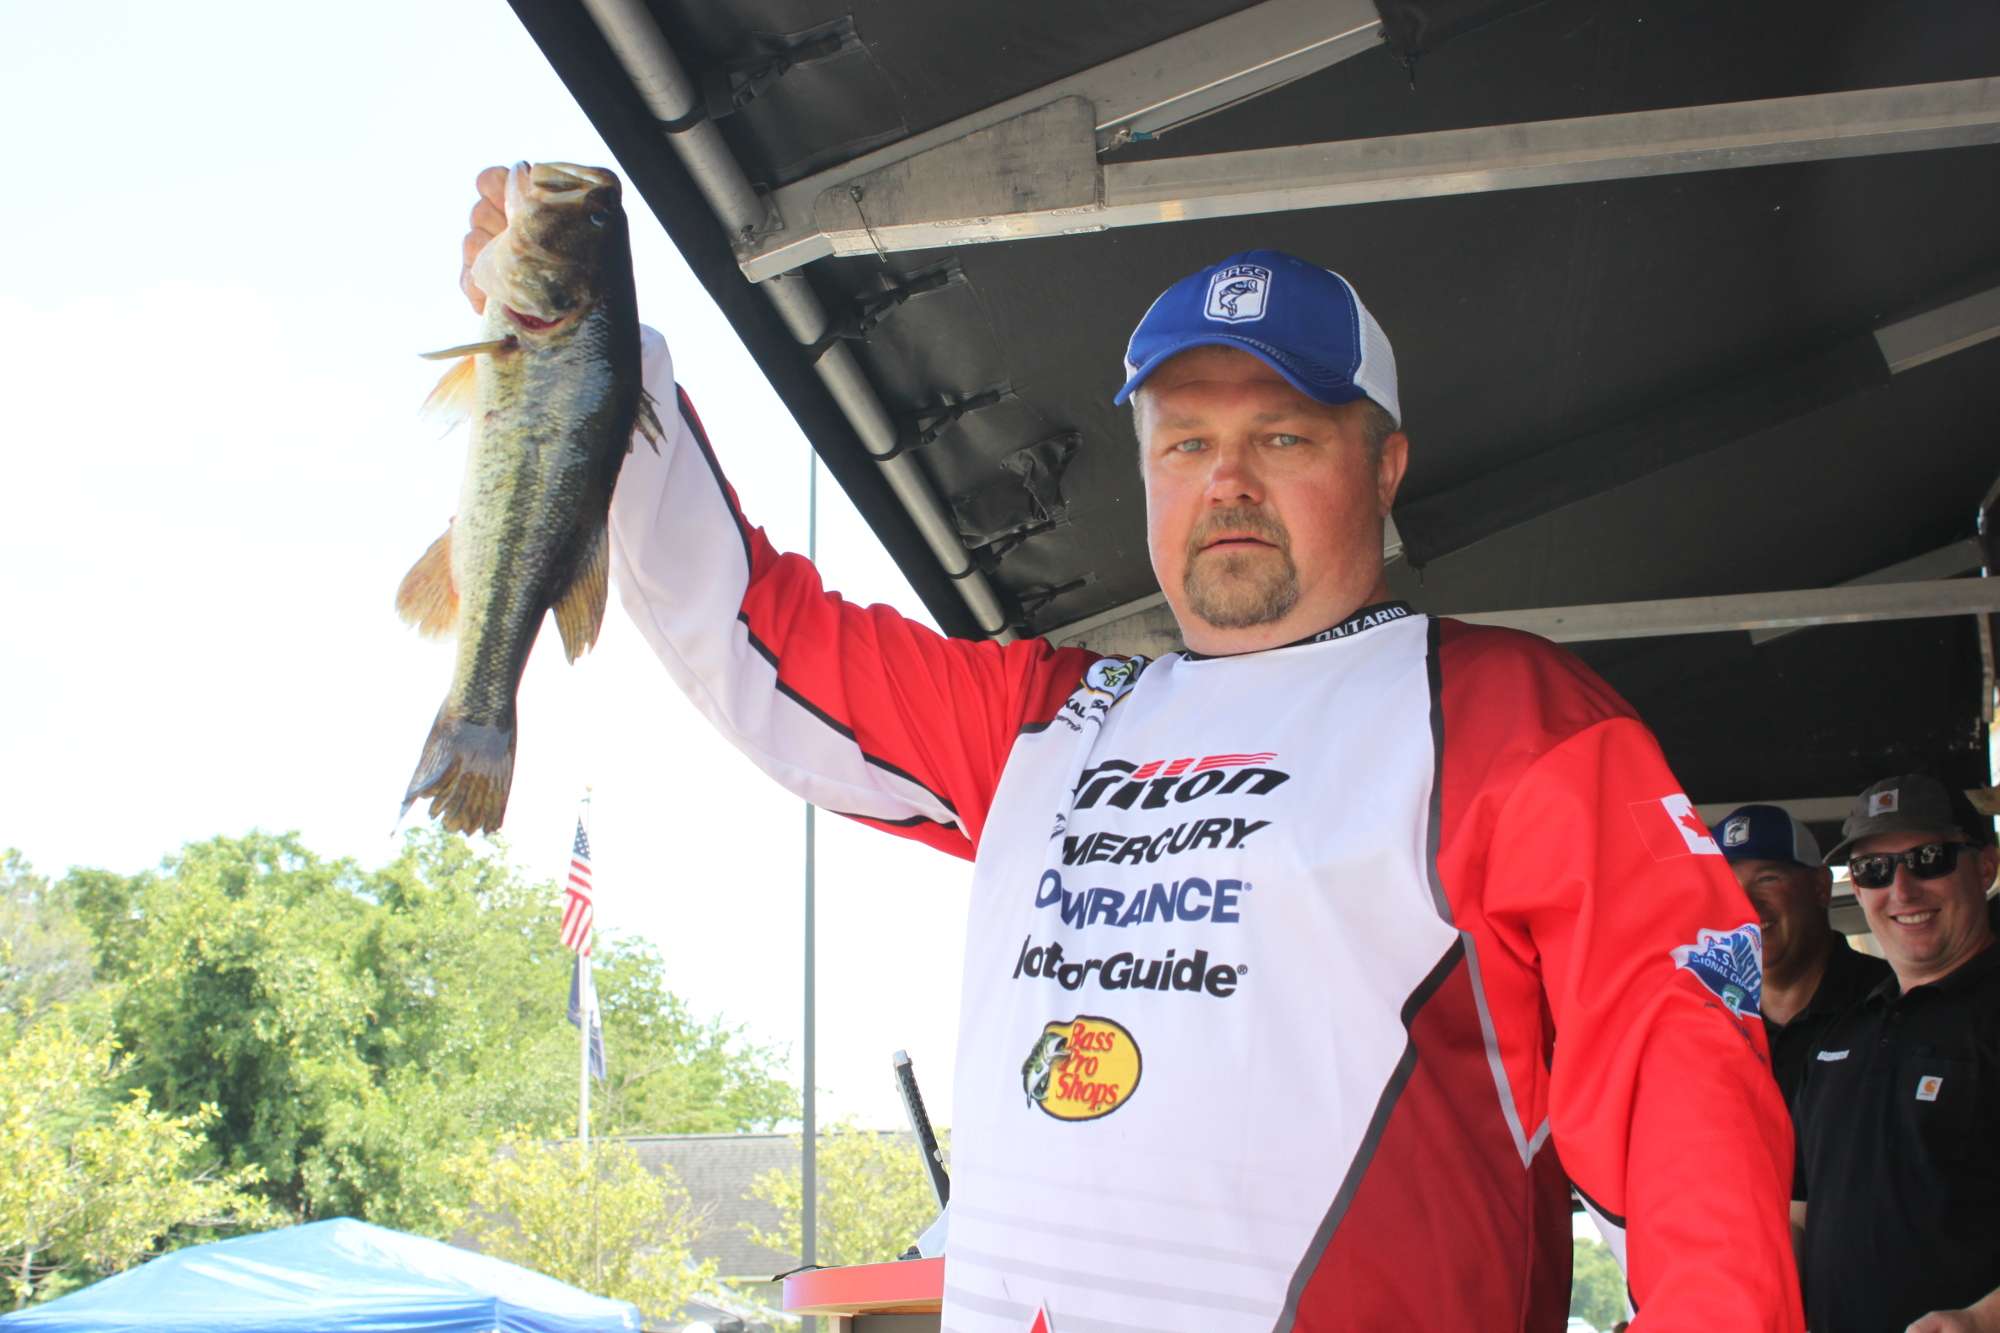 Did anyone travel farther than Kal Vaisanen and Team Ontario to compete this week? Nope. He made this nice bass count and is second among the Canadian boaters, which means heâll fish Friday too.